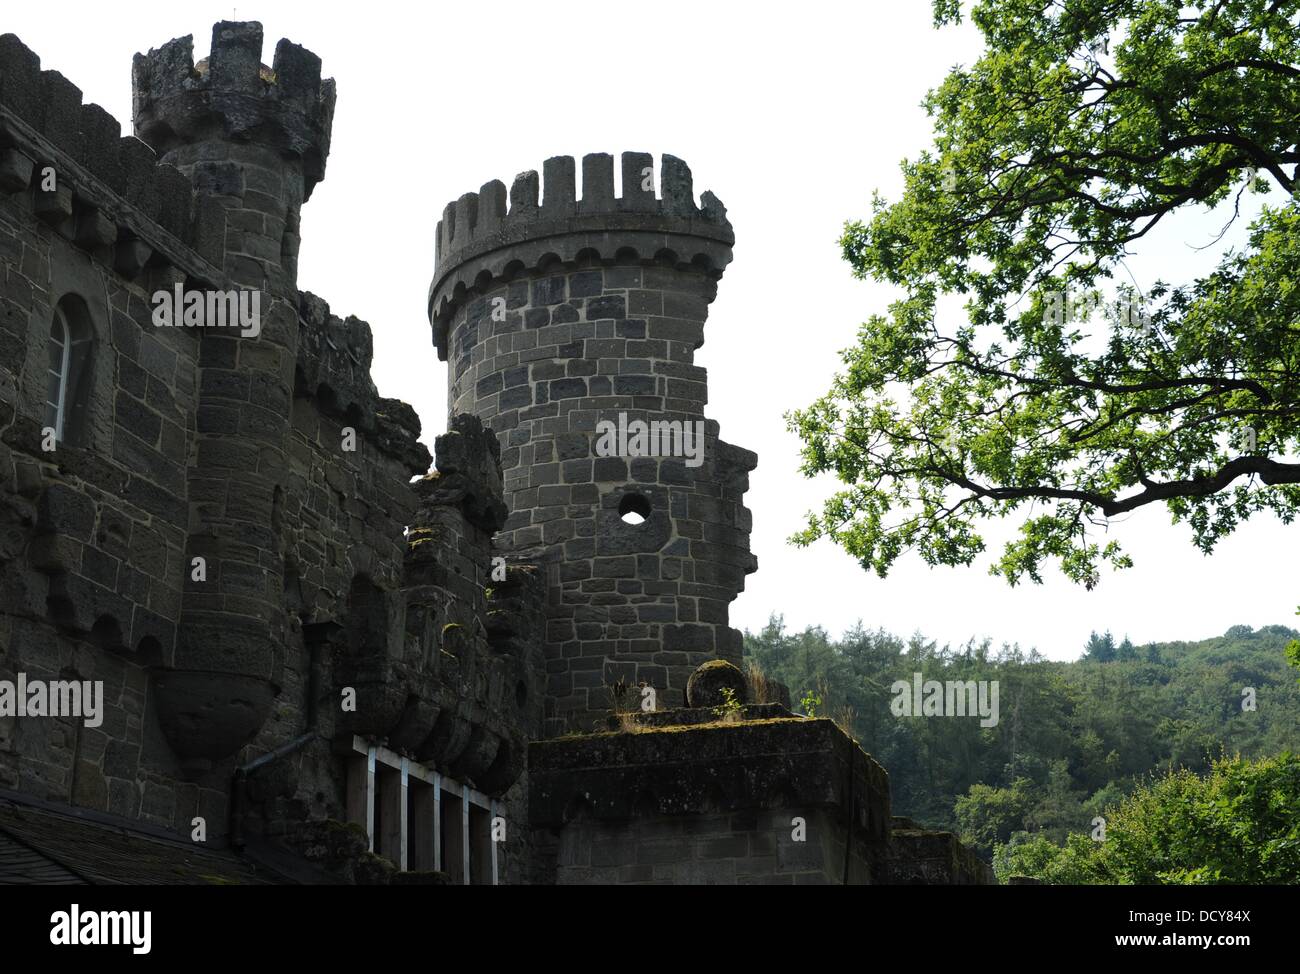 The Loewenburg (Lions Castle) is pictured in Kassel, Germany, 22 August 2013. The castle located at the UNESCO-World Heritage Site Bergpark Wilhelmshoehe will receive its main tower again: the historical Bergfried shall be reconstructed according to plans of landgrave Wilhelm IX. from the 18th century. Photo: UWE ZUCCHI Stock Photo